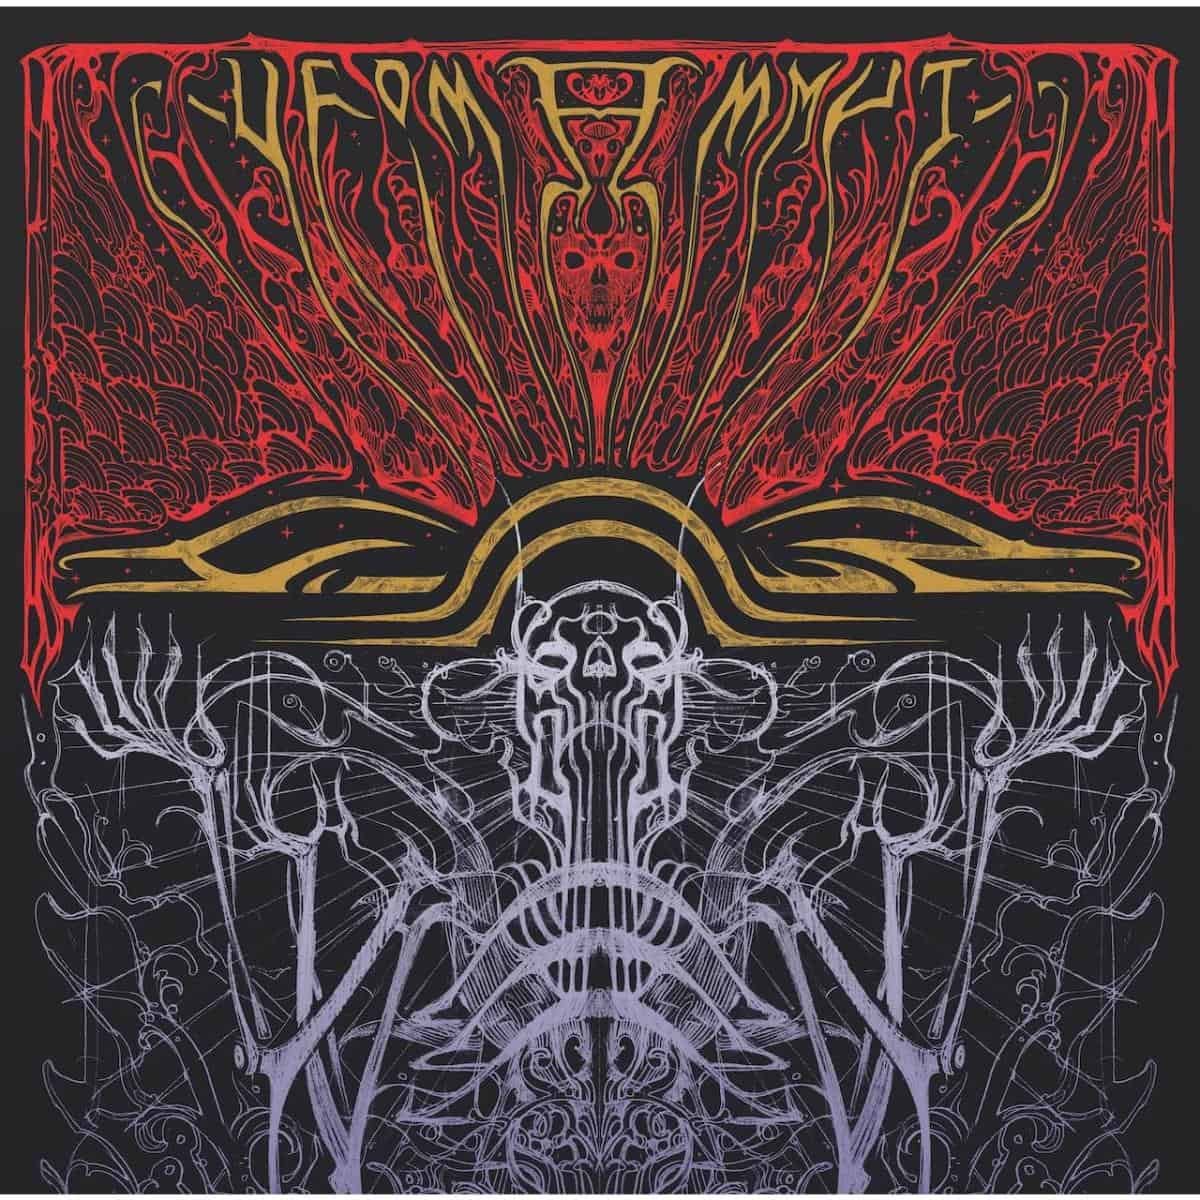 NEW MUSIC FRIDAY: ‘Hidden’ by Ufomammut Another winner of lumbering doom-laden riffage from the Italian stoner metallers. @ufomammut_band normanrecords.com/features/best-…